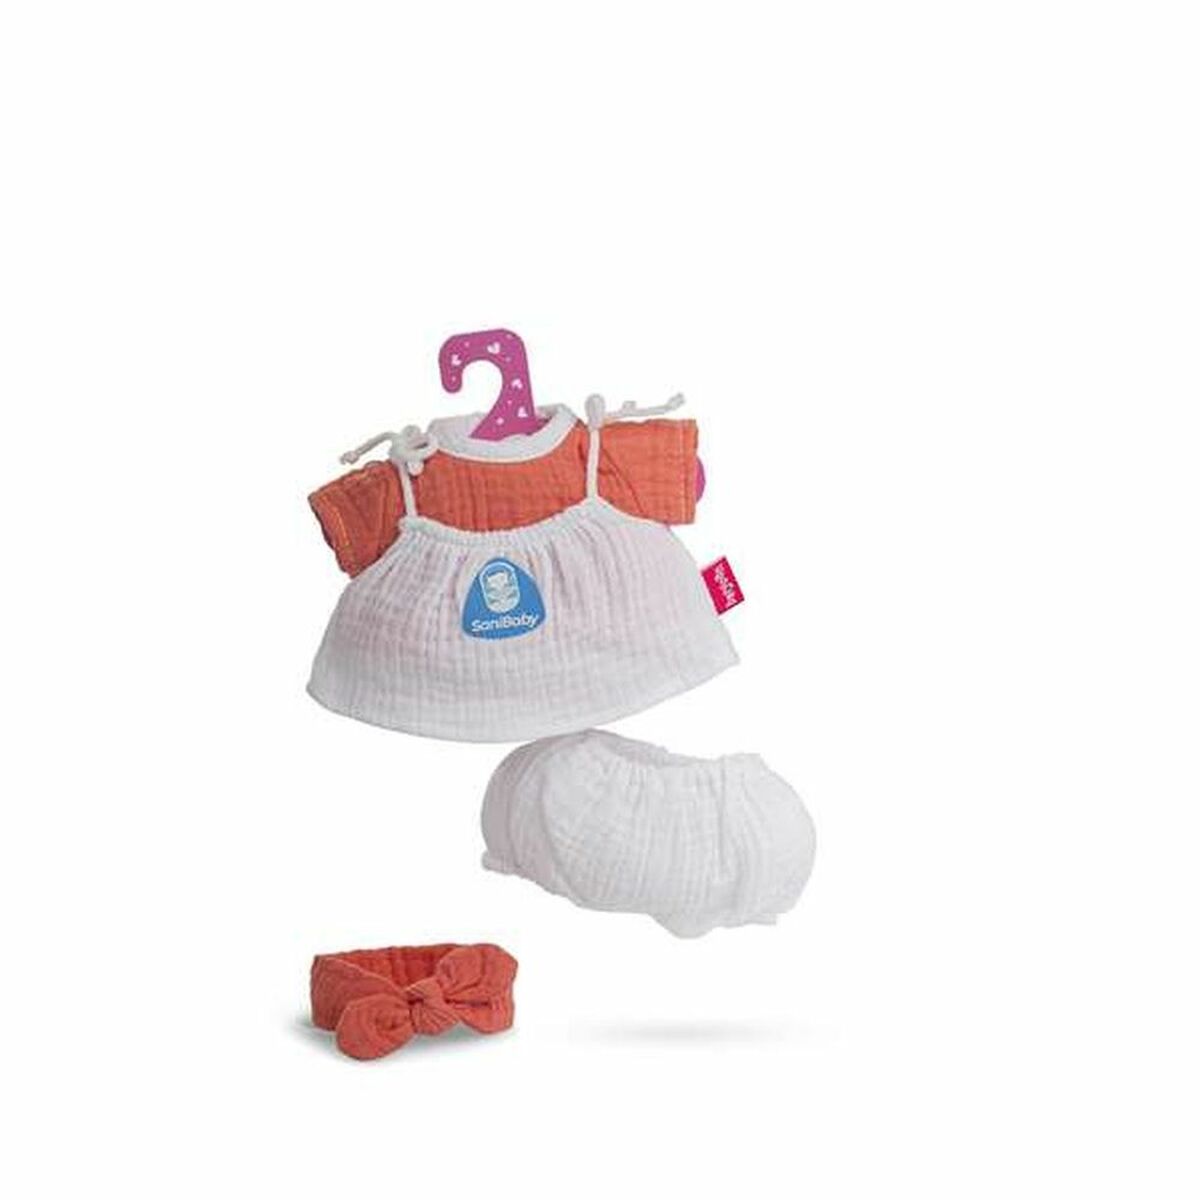 Doll's clothes Berjuan Sanibaby Coral (28 cm)